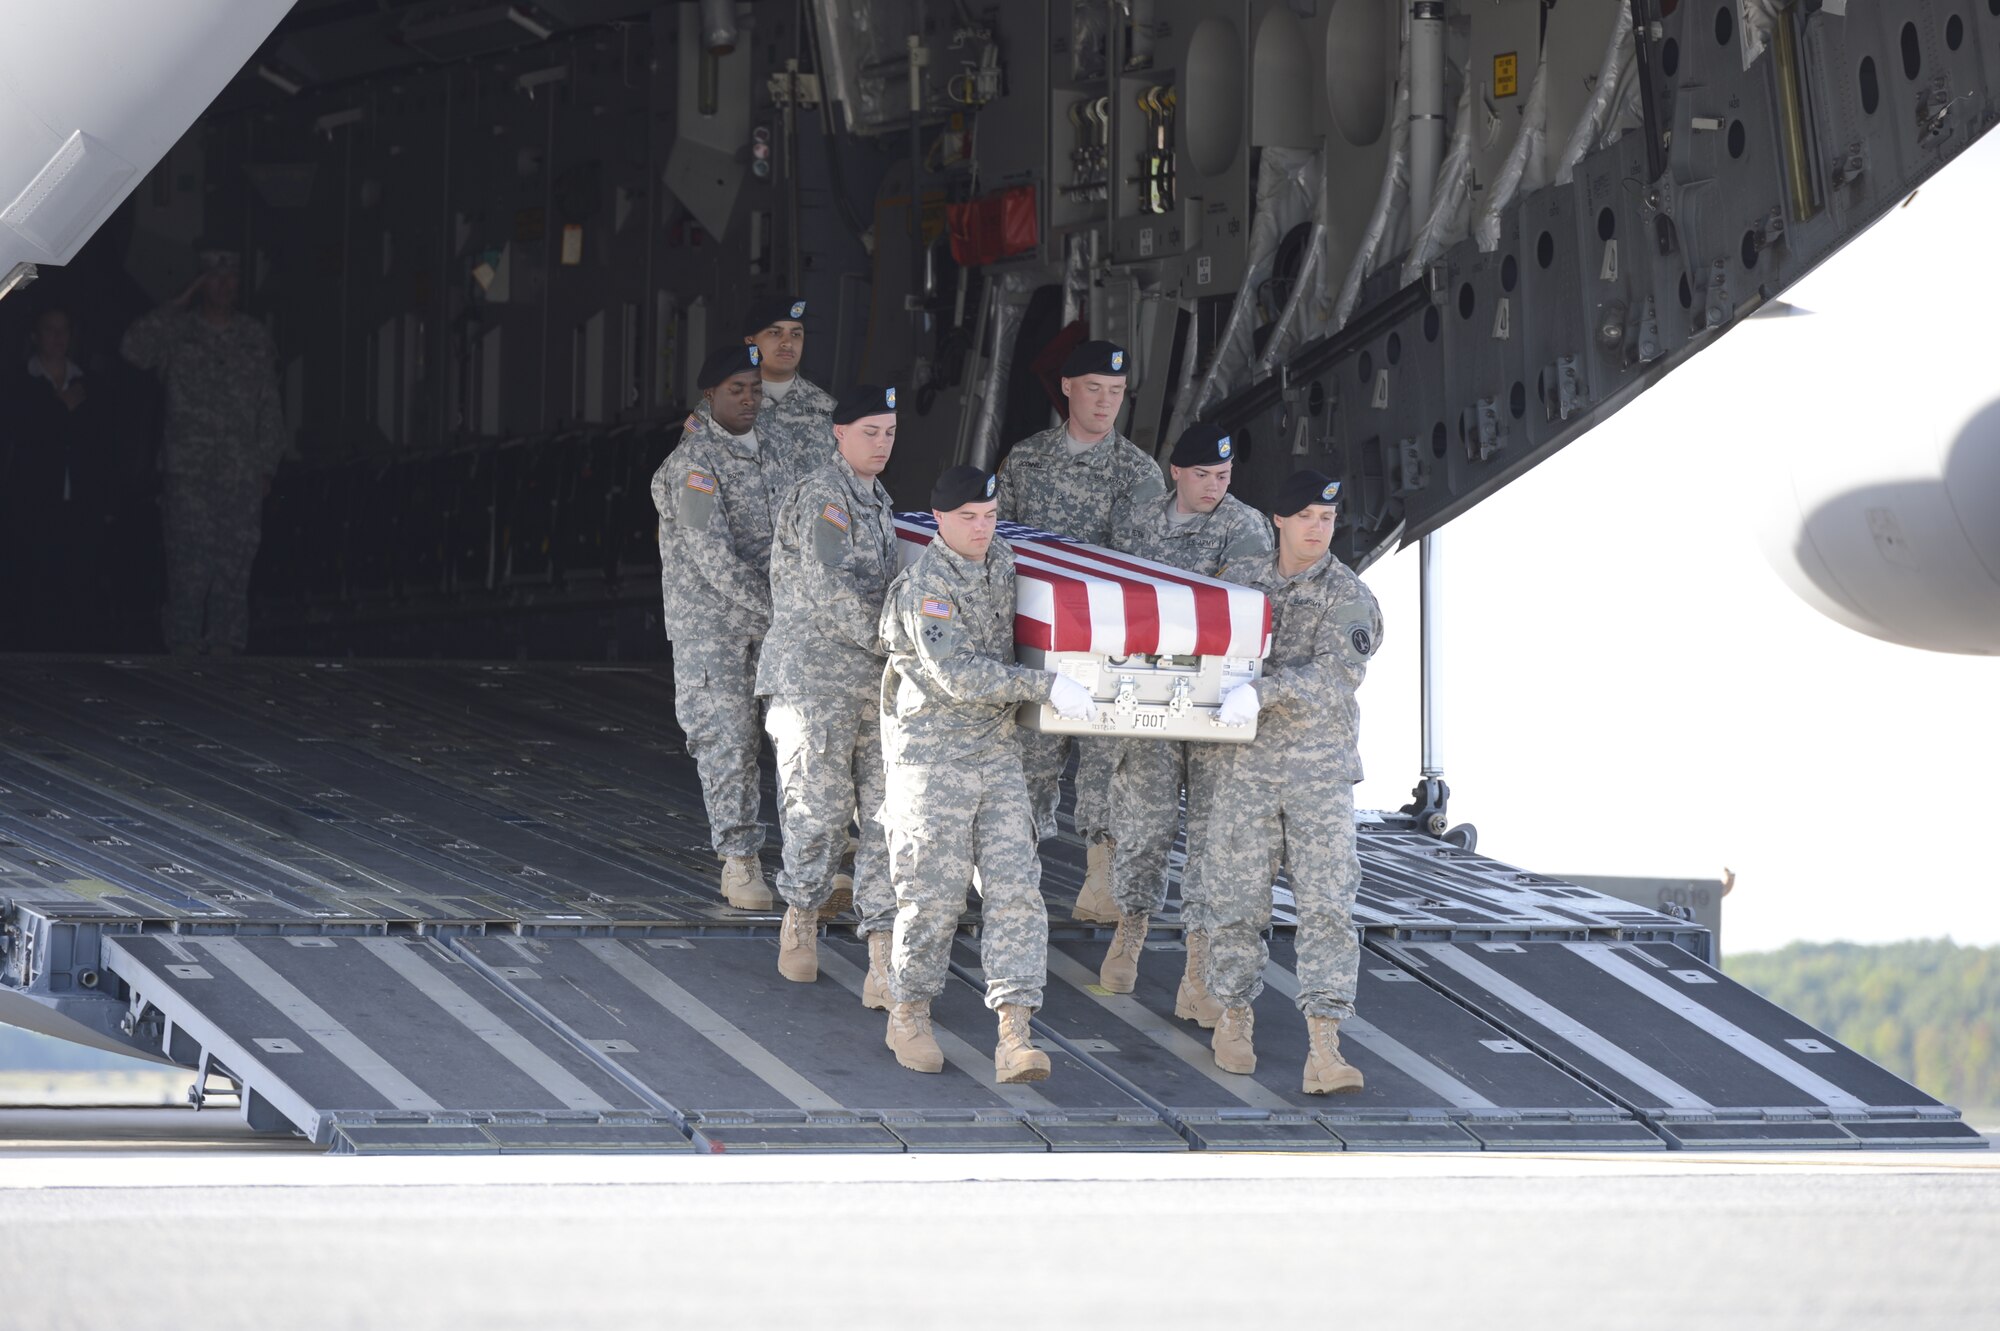 A U.S. Army carry team transfers the remains of Staff Sgt. Randall R. Lane, of Indianapolis, Ind., during a dignified transfer Sept. 15, 2013 at Dover Air Force Base, Del. Lane was assigned to the 1438th Transportation Company, Indiana Army National Guard, Indianapolis, Ind. (U.S. Air Force photo/Greg L. Davis)